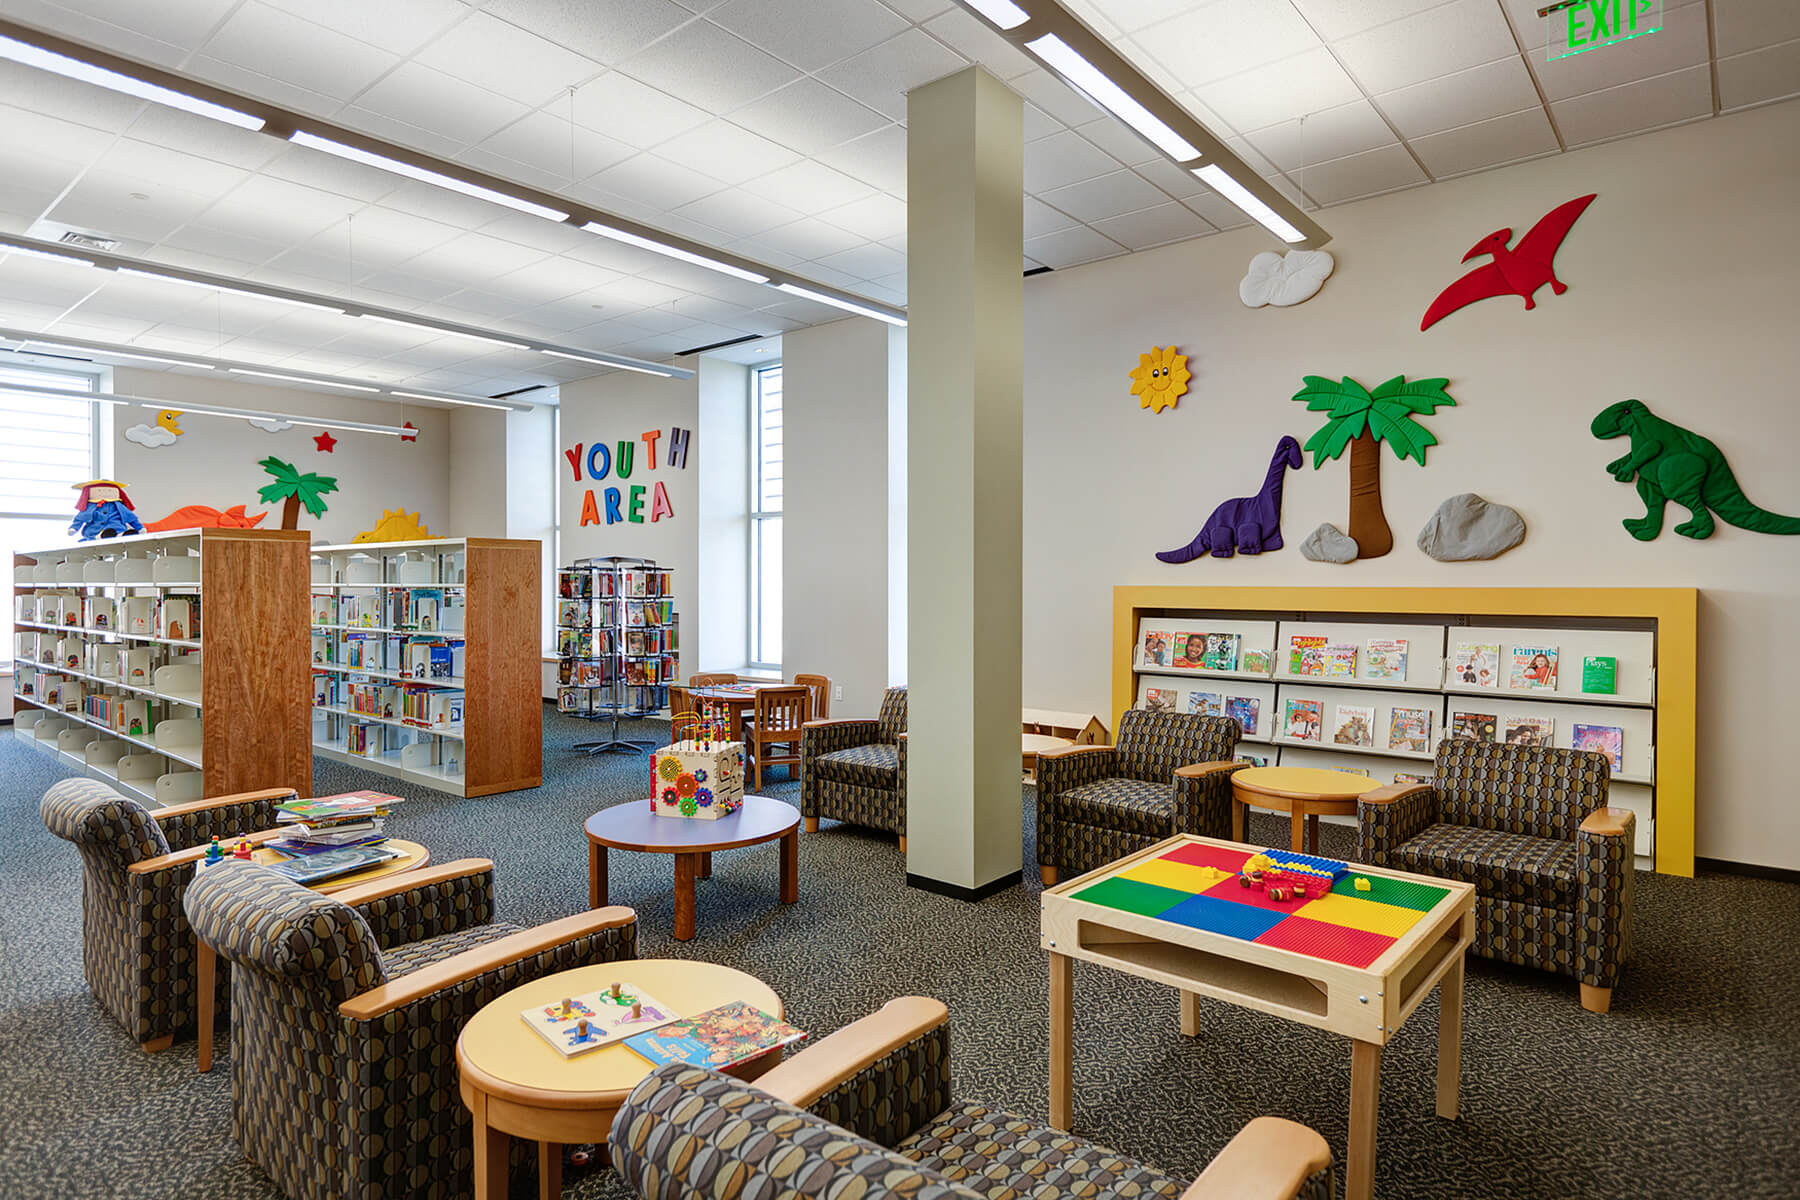 Ft-Bend-Library_051